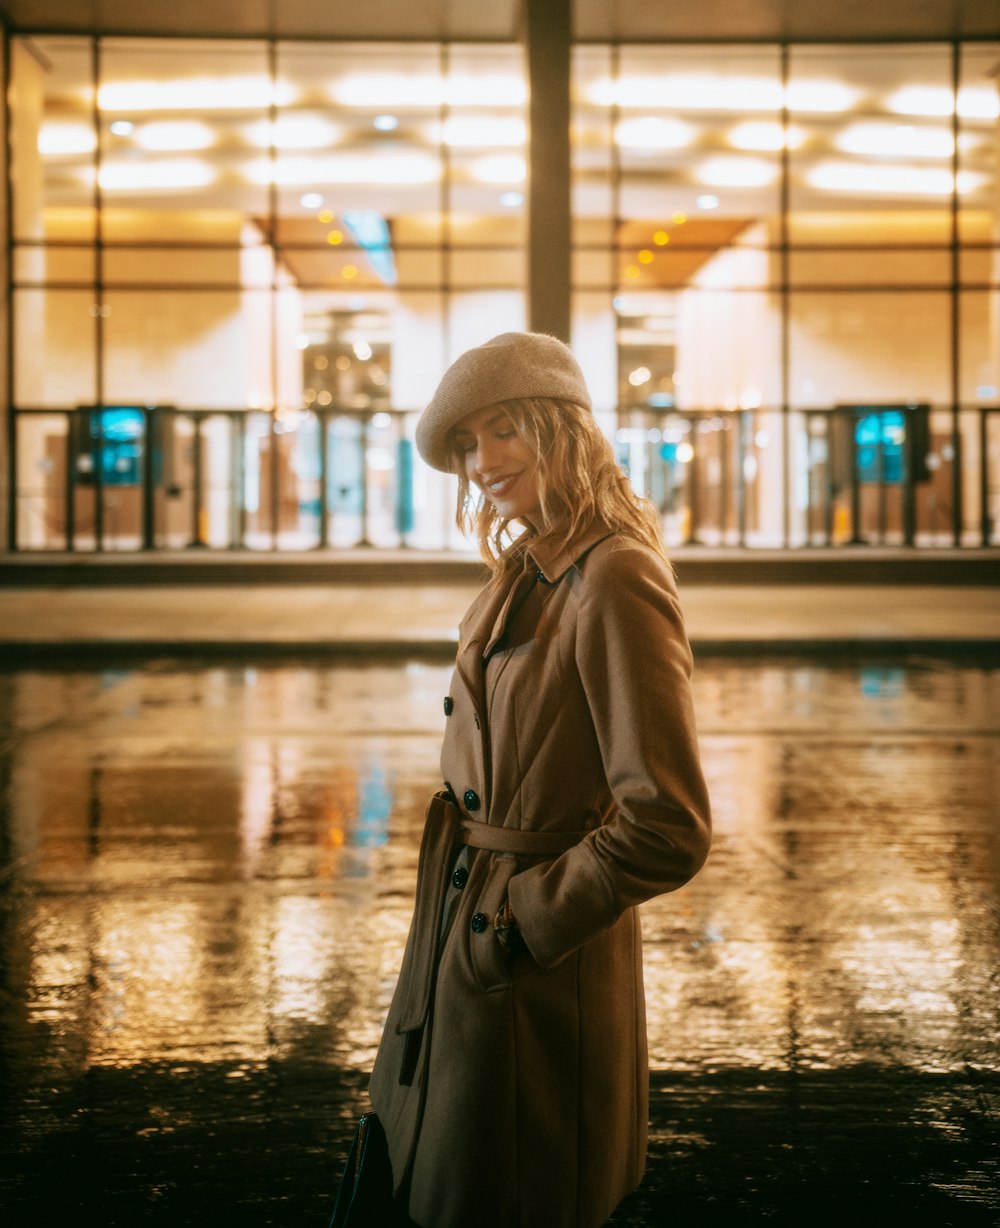 woman in brown coat and white knit cap standing on wet ground during night time